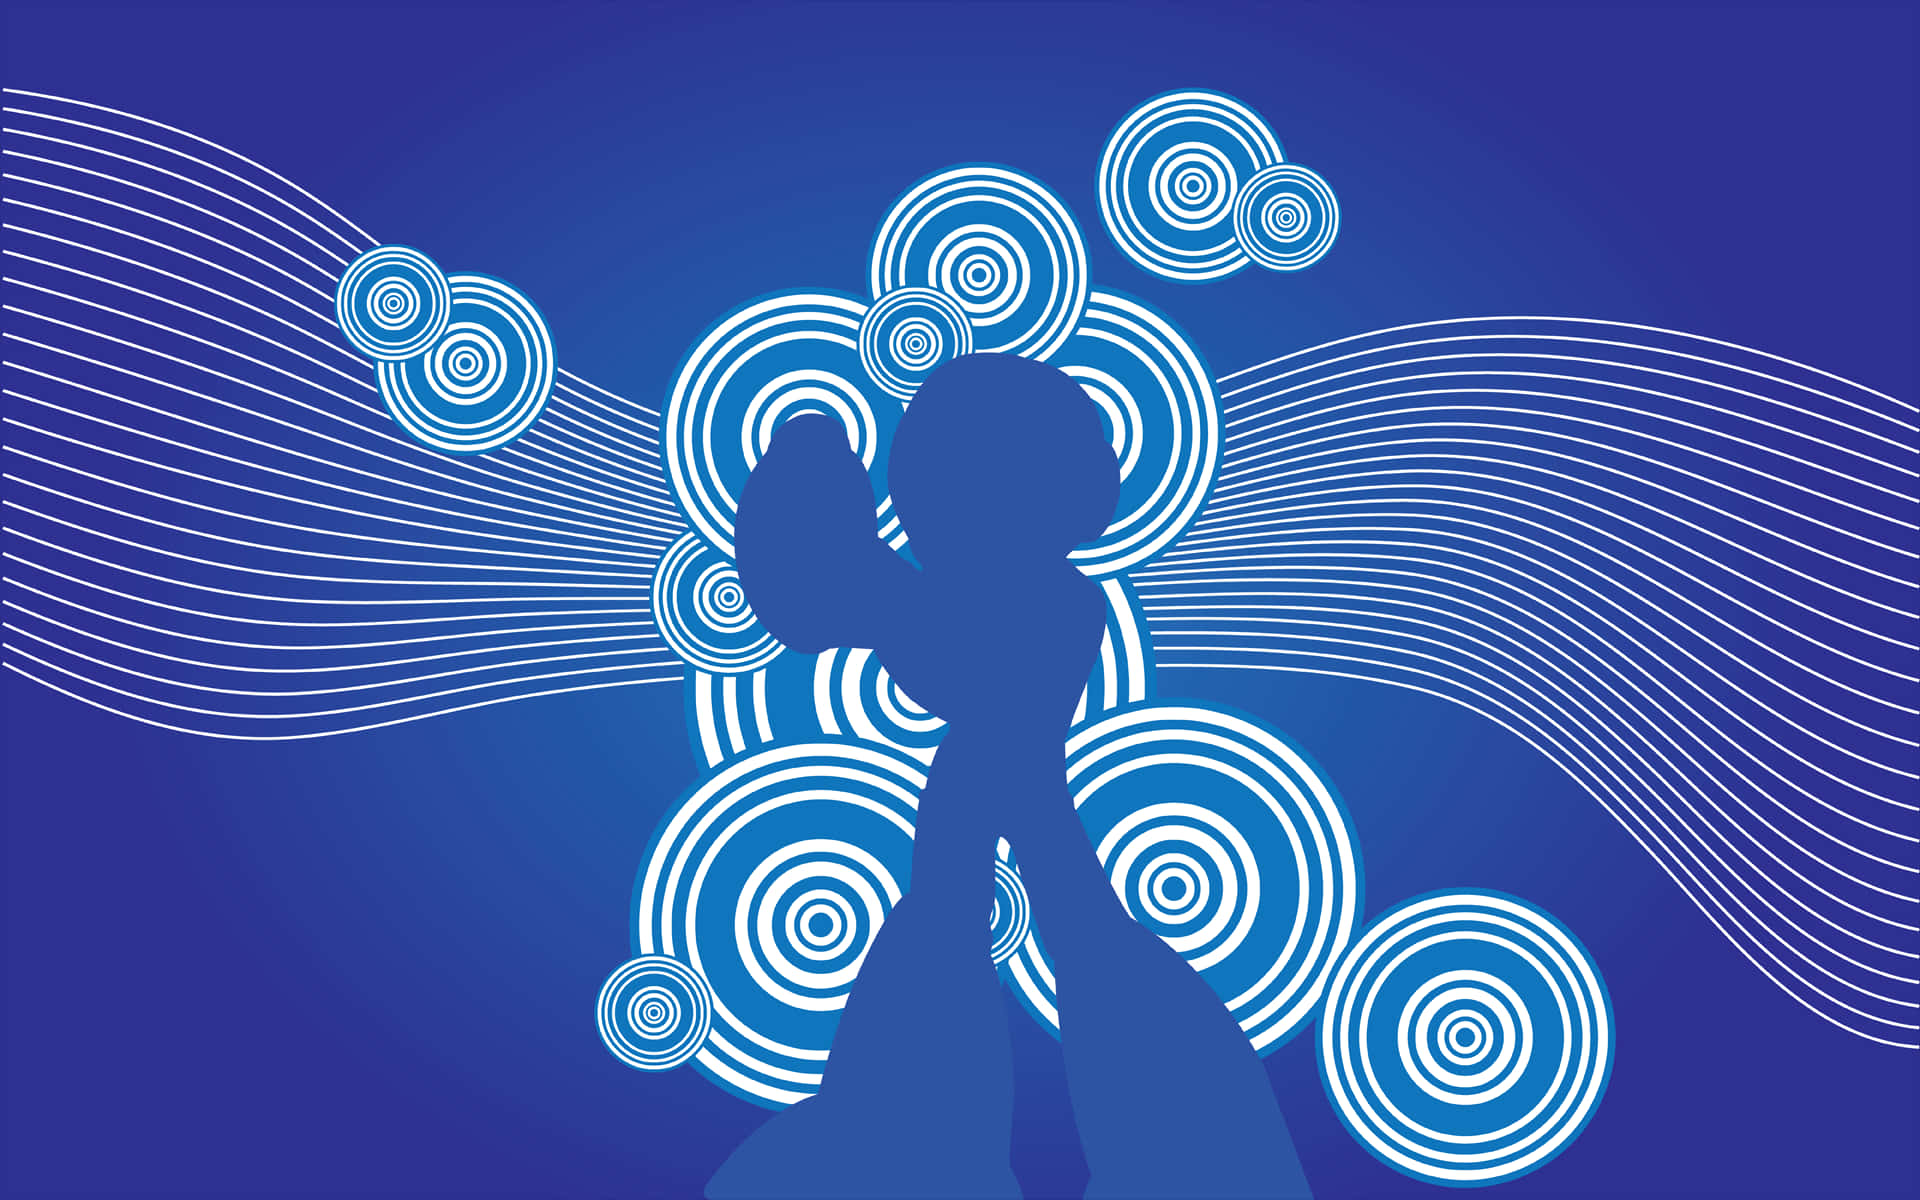 Mega Man Silhouette And Concentric Circles Wallpaper